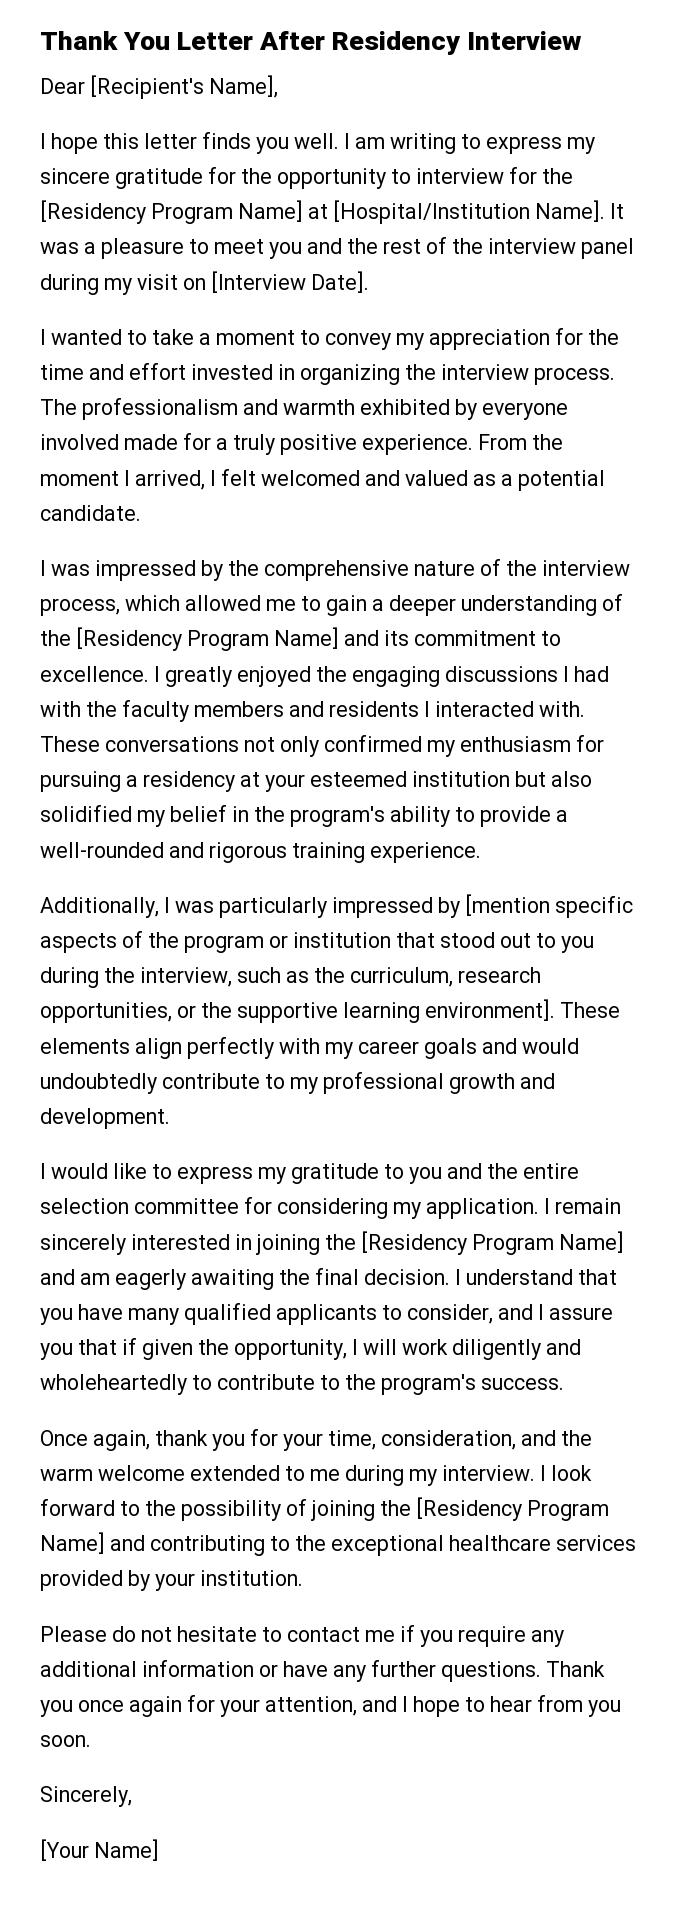 Thank You Letter After Residency Interview